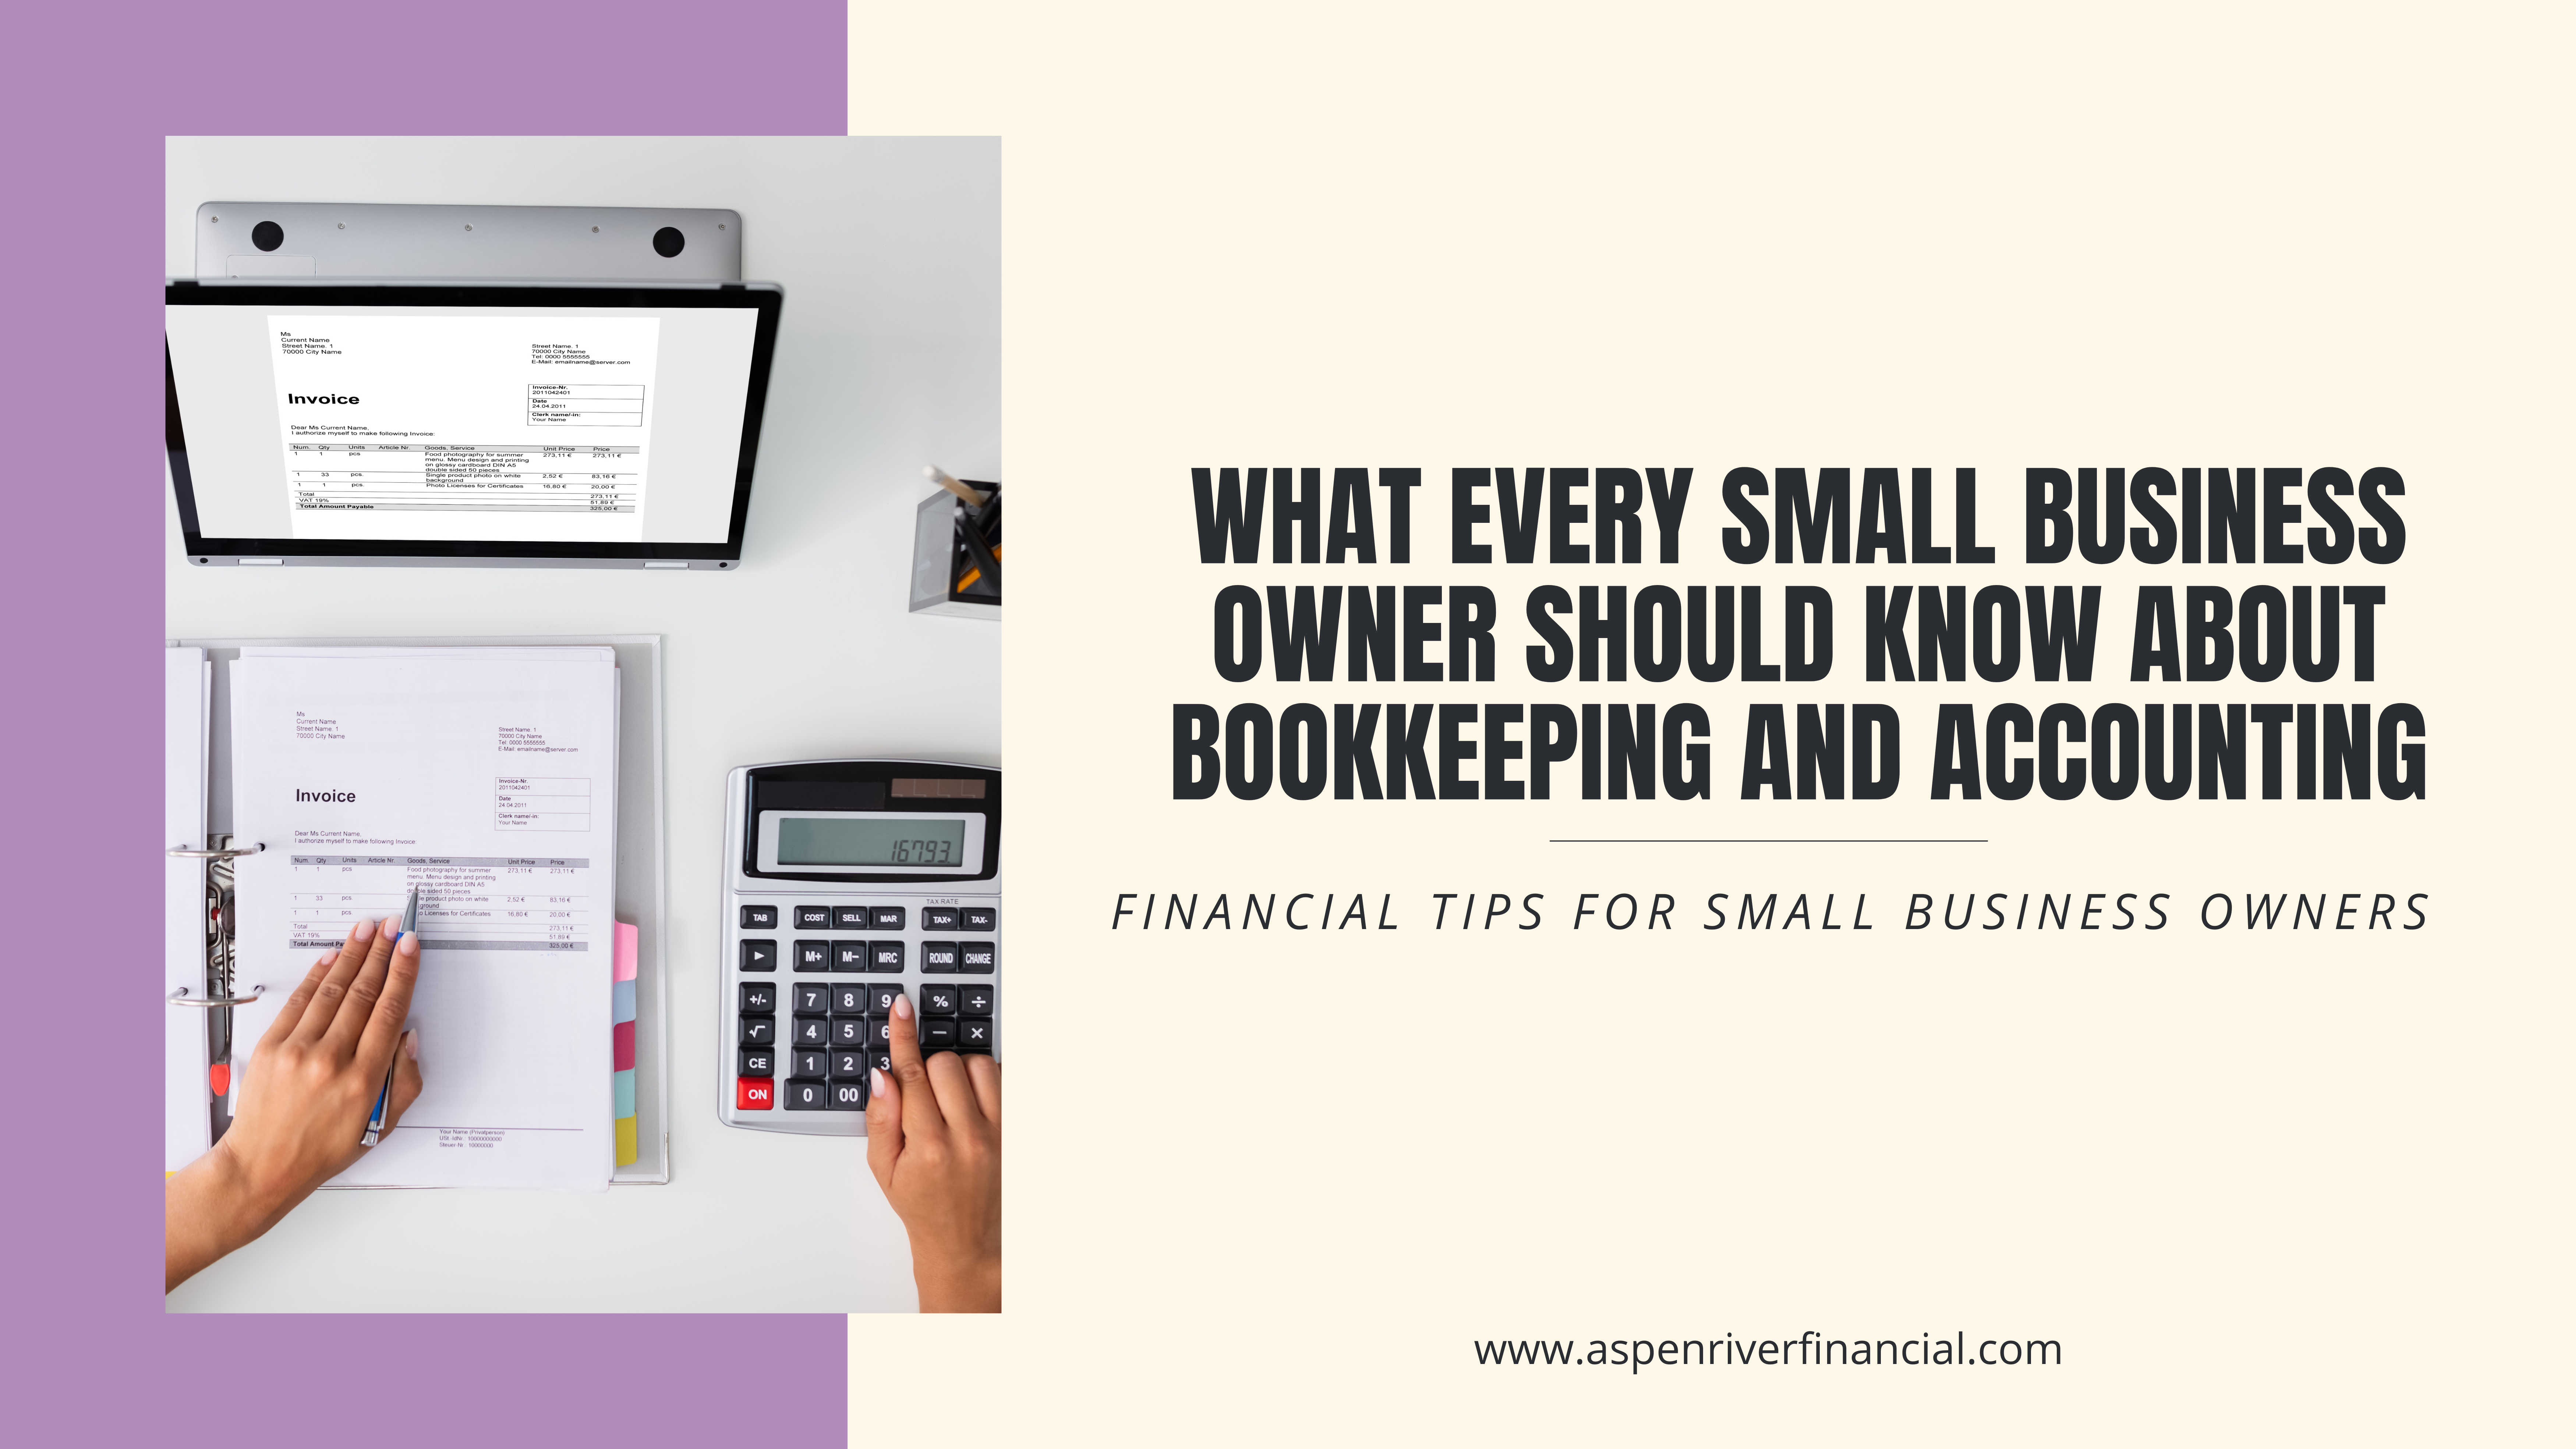 What every small business owner should know about bookkeeping and accounting